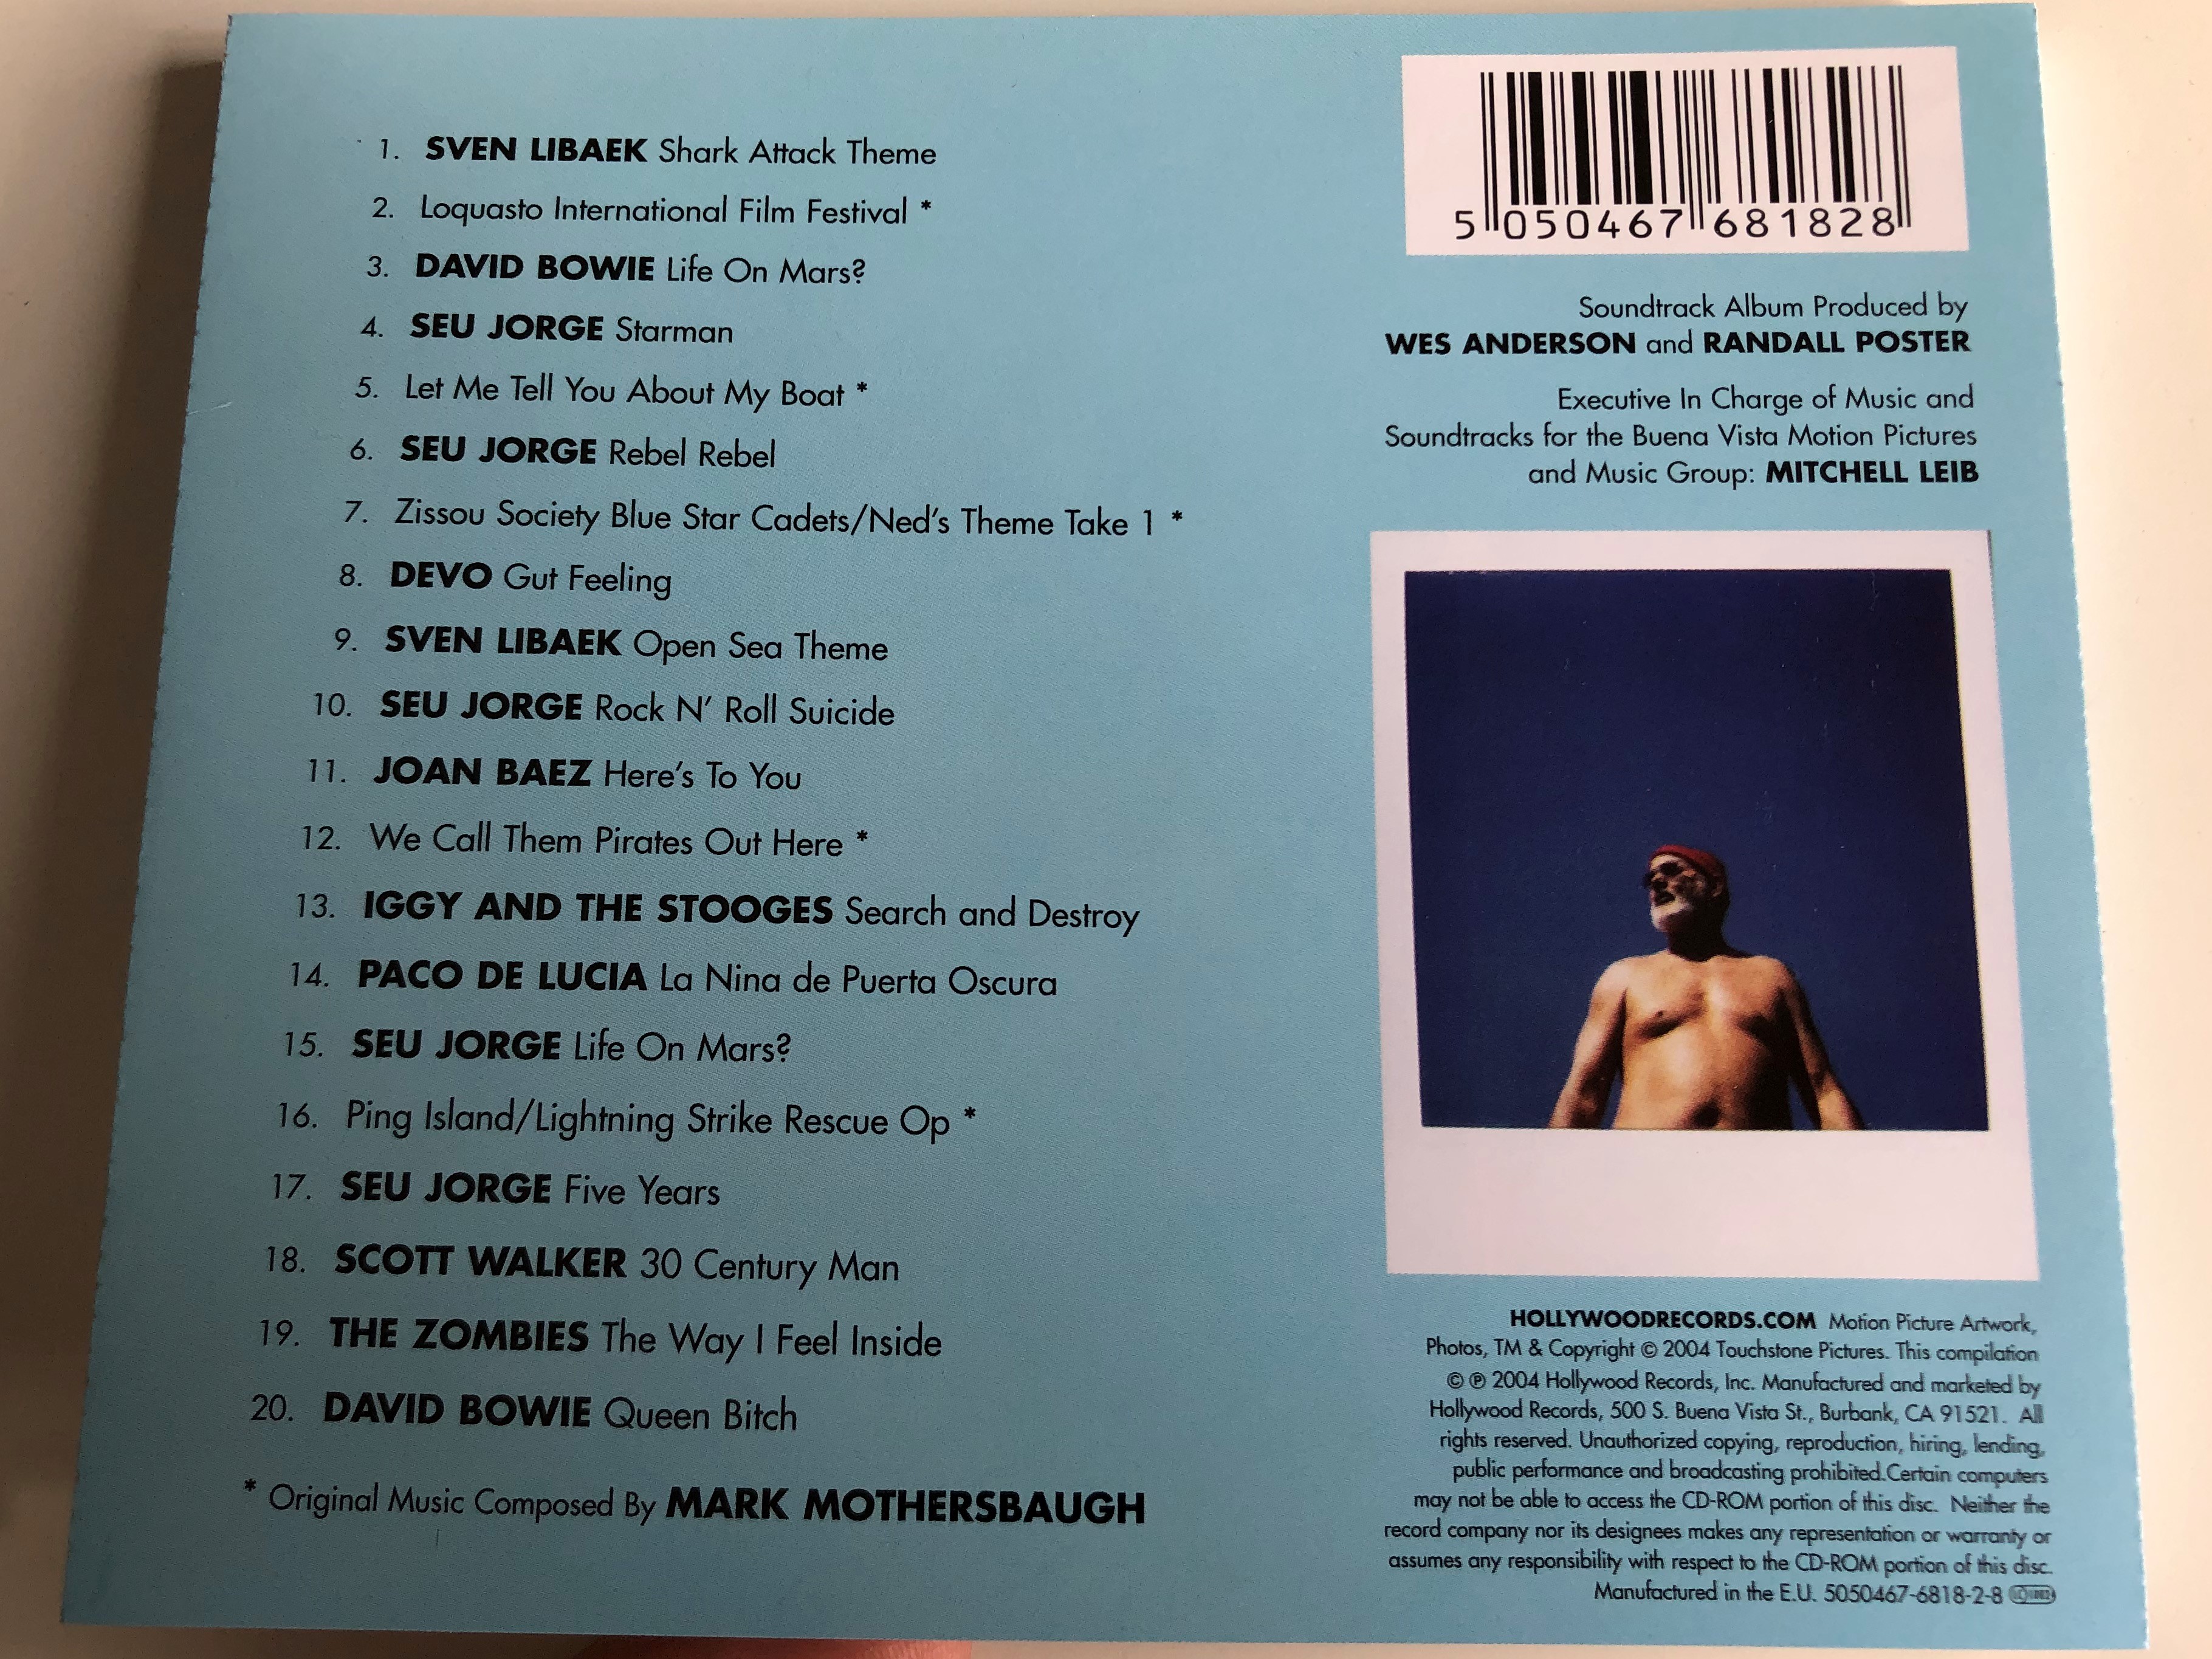 the-life-aquatic-original-soundtrack-with-steve-zissou-music-by-mark-mothersbaugh-produced-by-wes-anderson-and-randall-poster-audio-cd-2004-3-.jpg